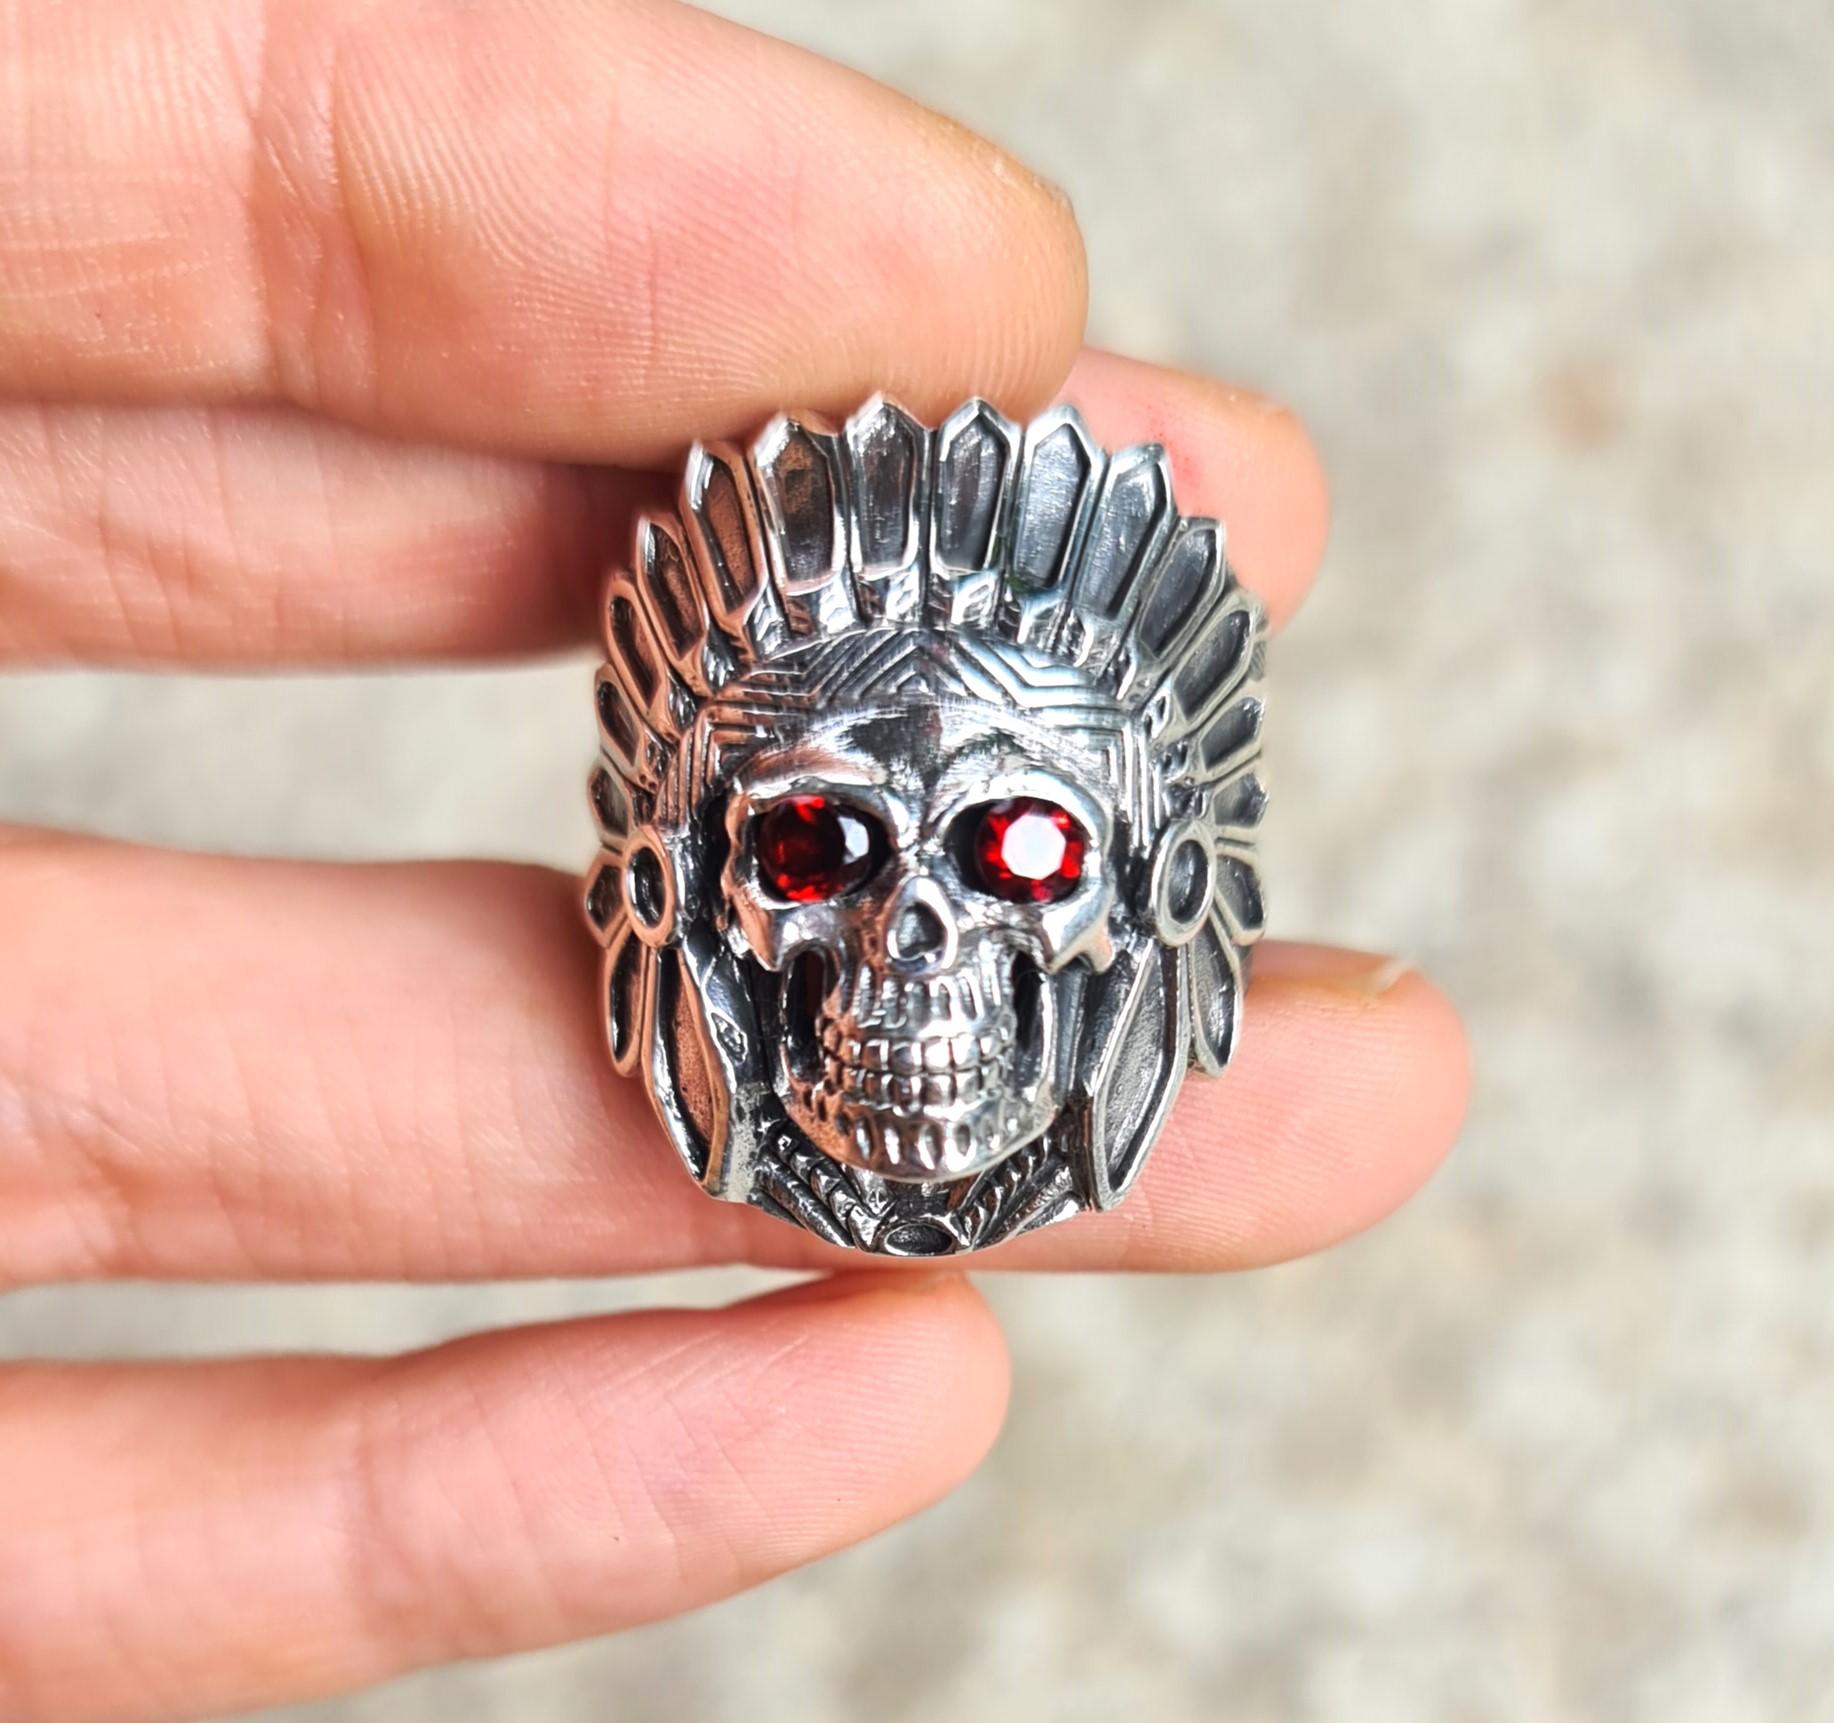 Garnet Eyes American Indian Skull Tribal Chief Warrior Ring Sterling Silver 925 For Sale 6